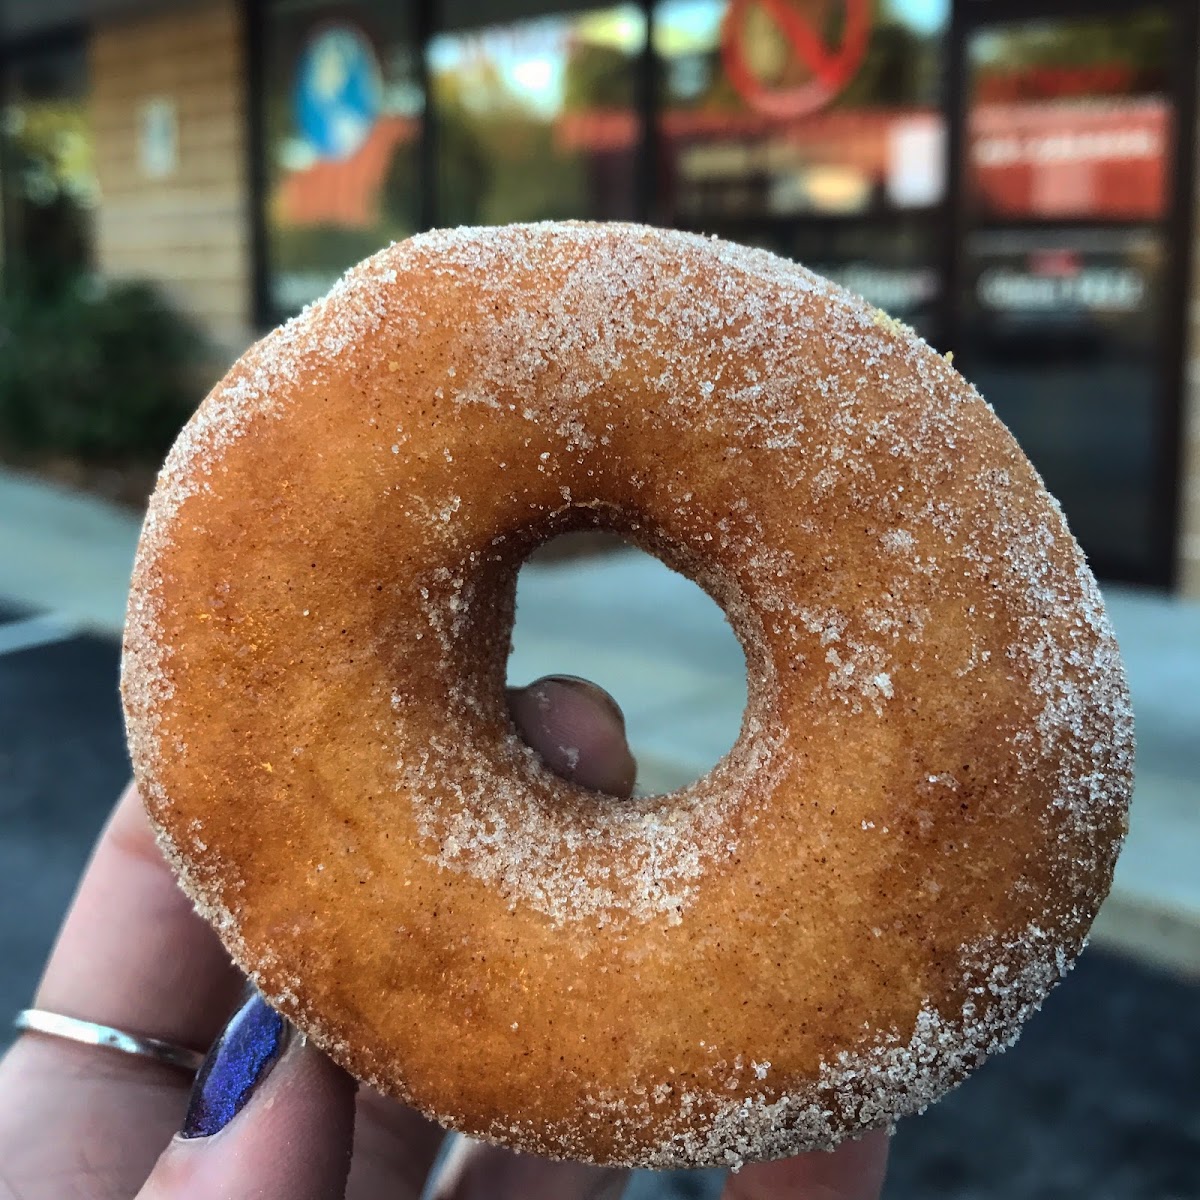 Gluten-Free Donuts at A & J Bakery